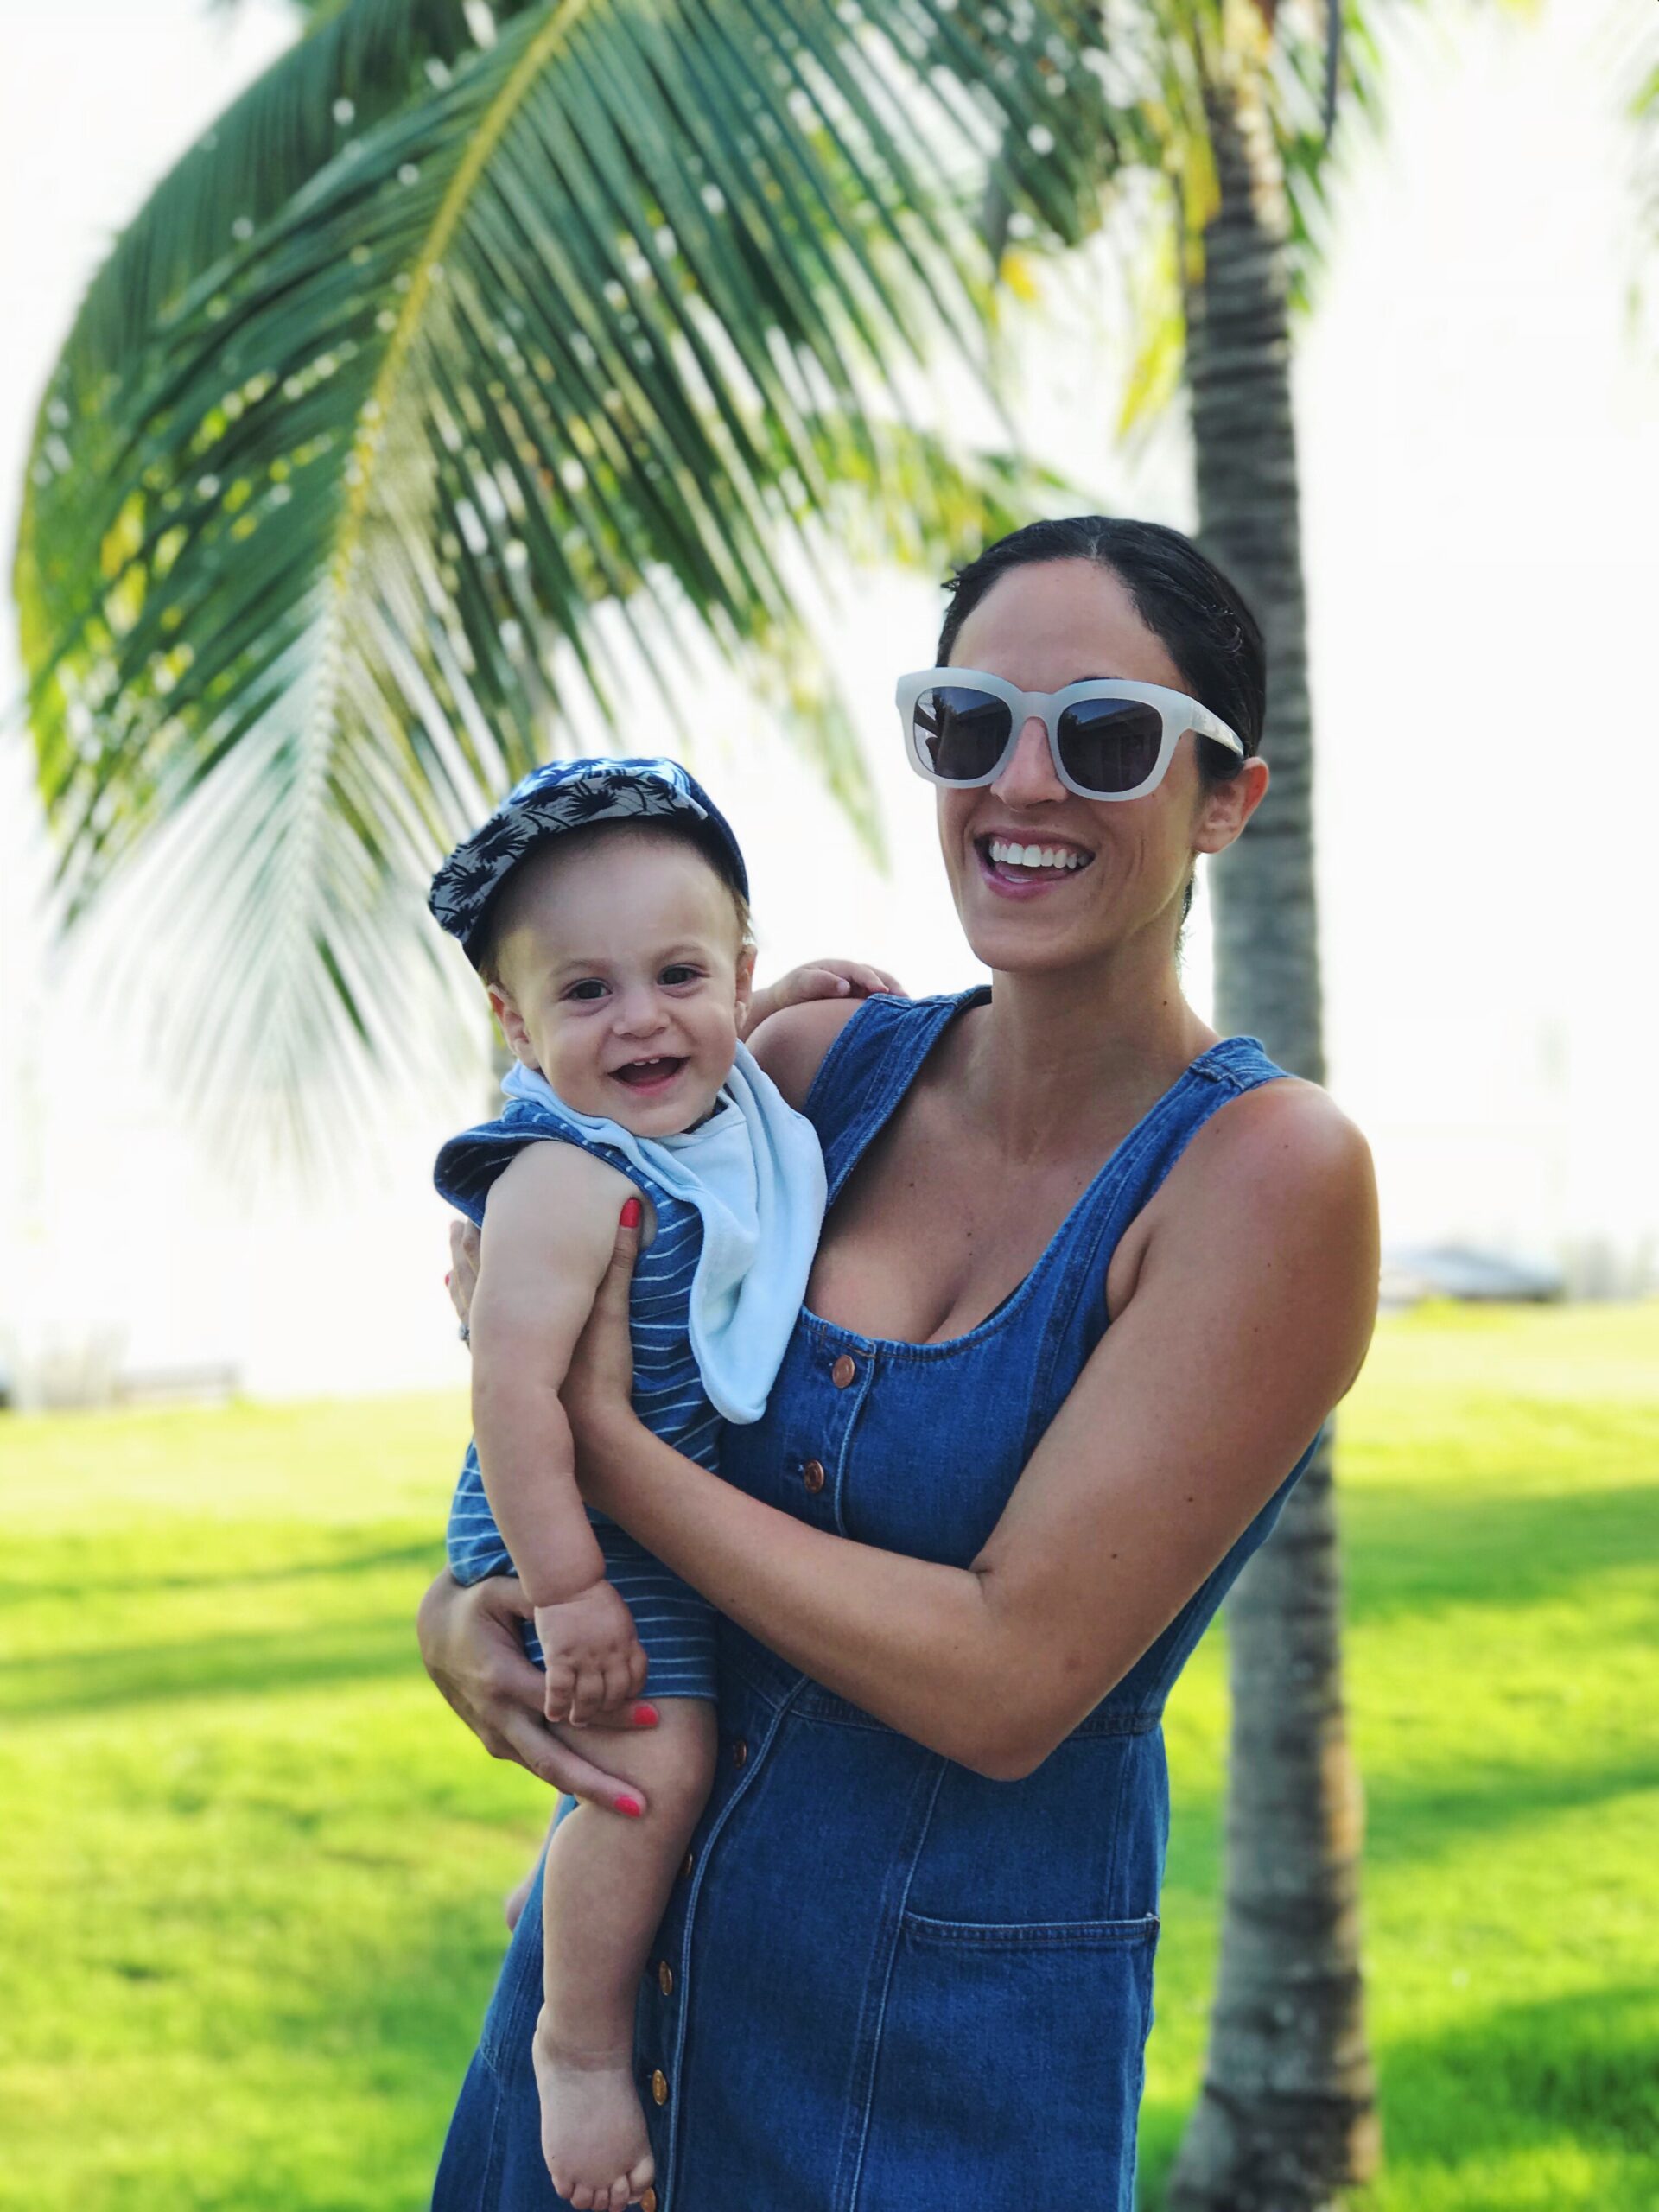 What to pack for a weeklong vacation with a baby